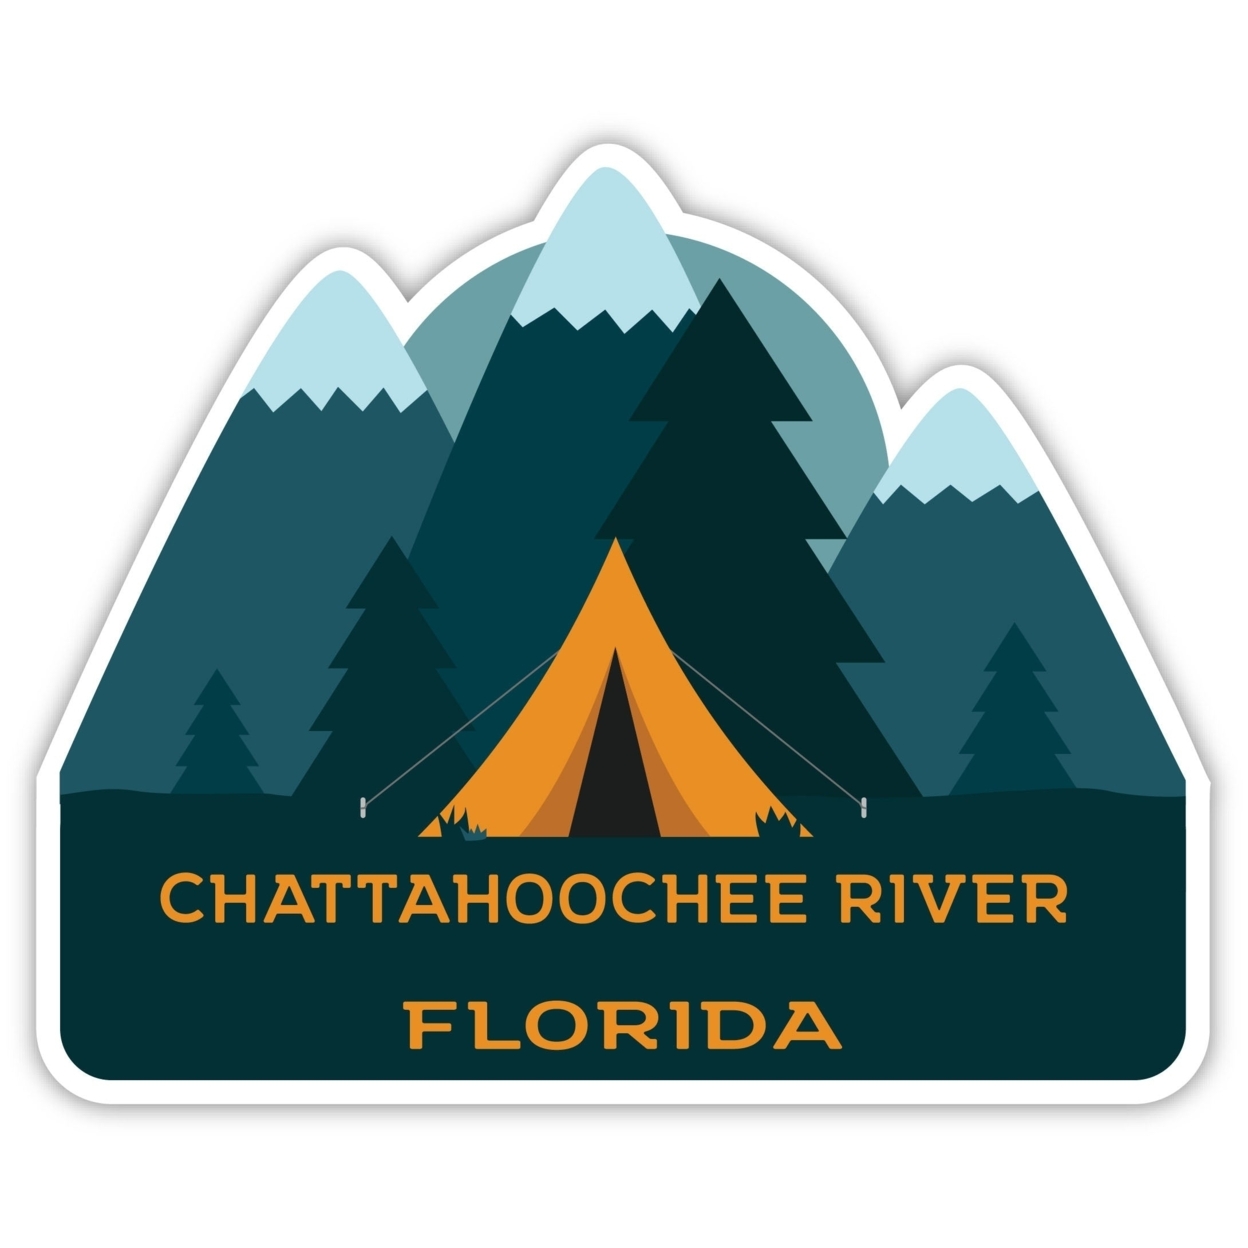 Chattahoochee River Florida Souvenir Decorative Stickers (Choose Theme And Size) - 4-Pack, 8-Inch, Tent